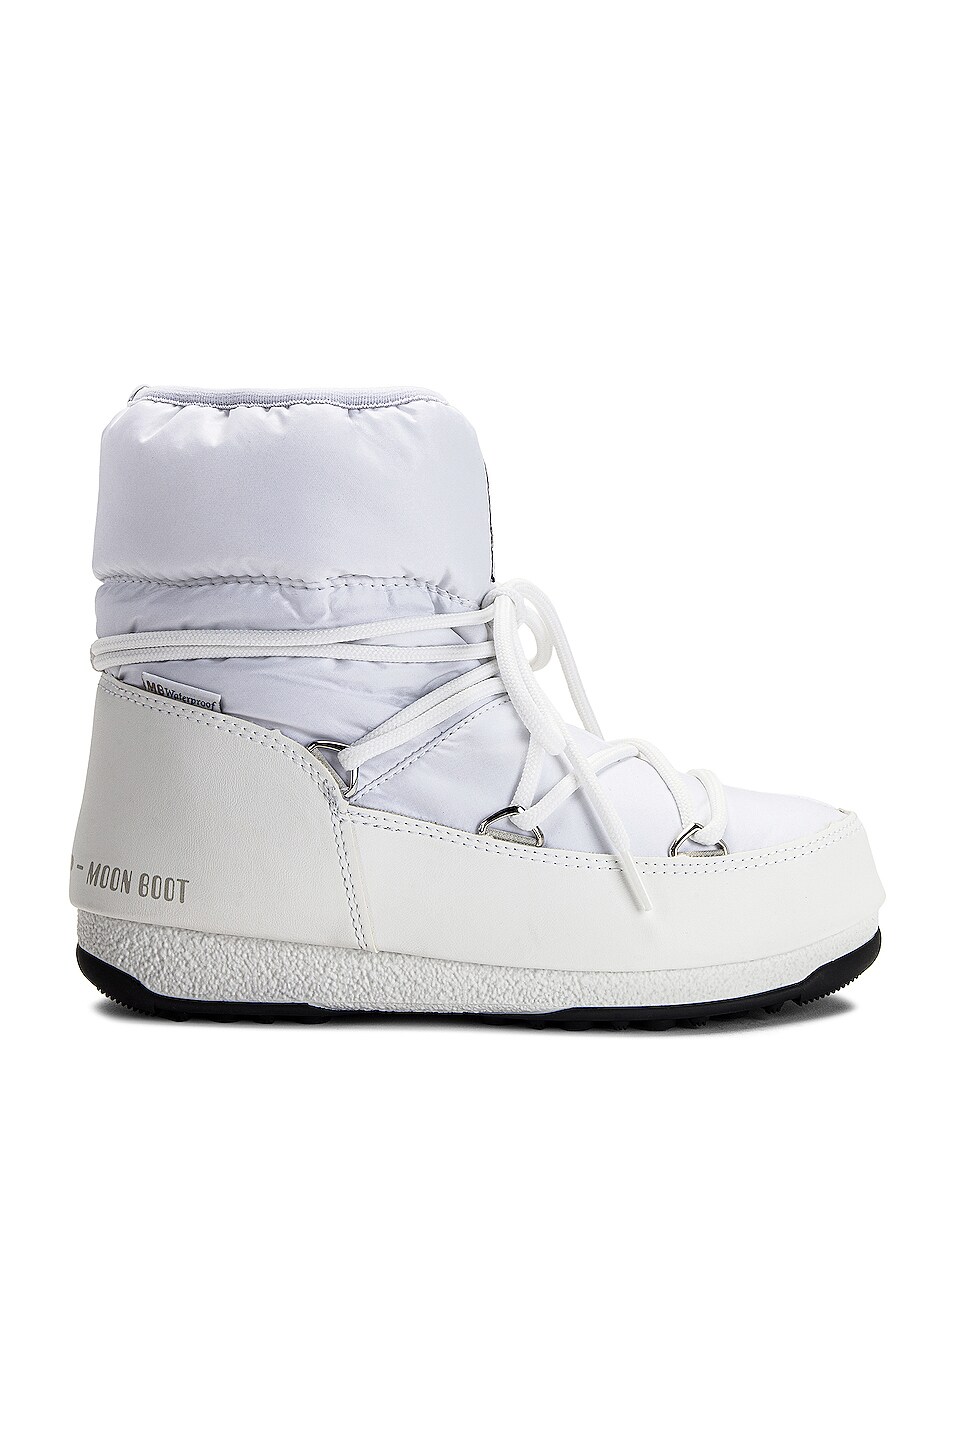 Image 1 of MOON BOOT Low Nylon Boot in White